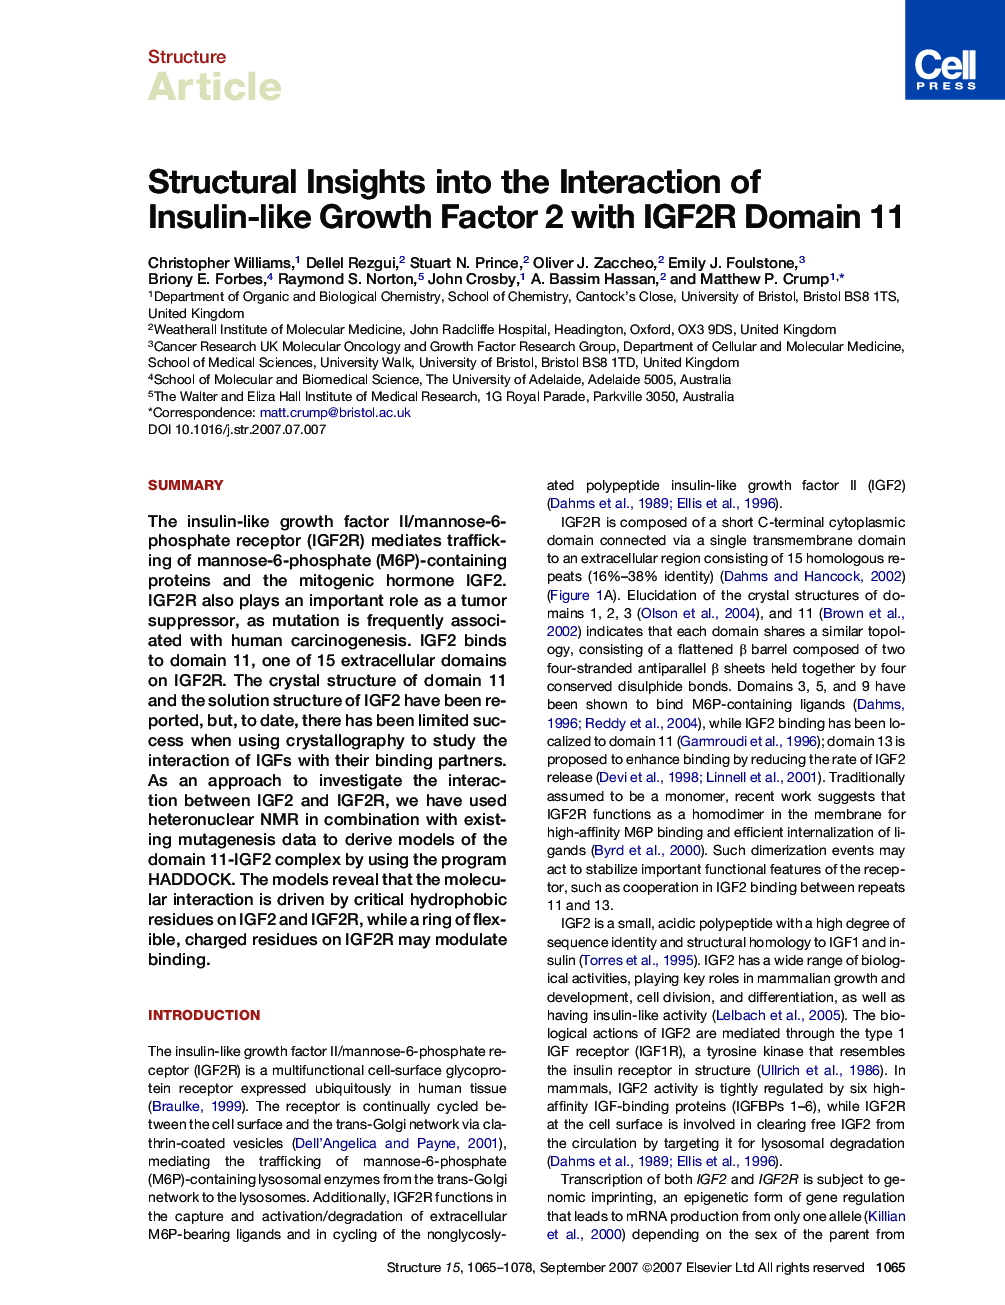 Structural Insights into the Interaction of Insulin-like Growth Factor 2 with IGF2R Domain 11